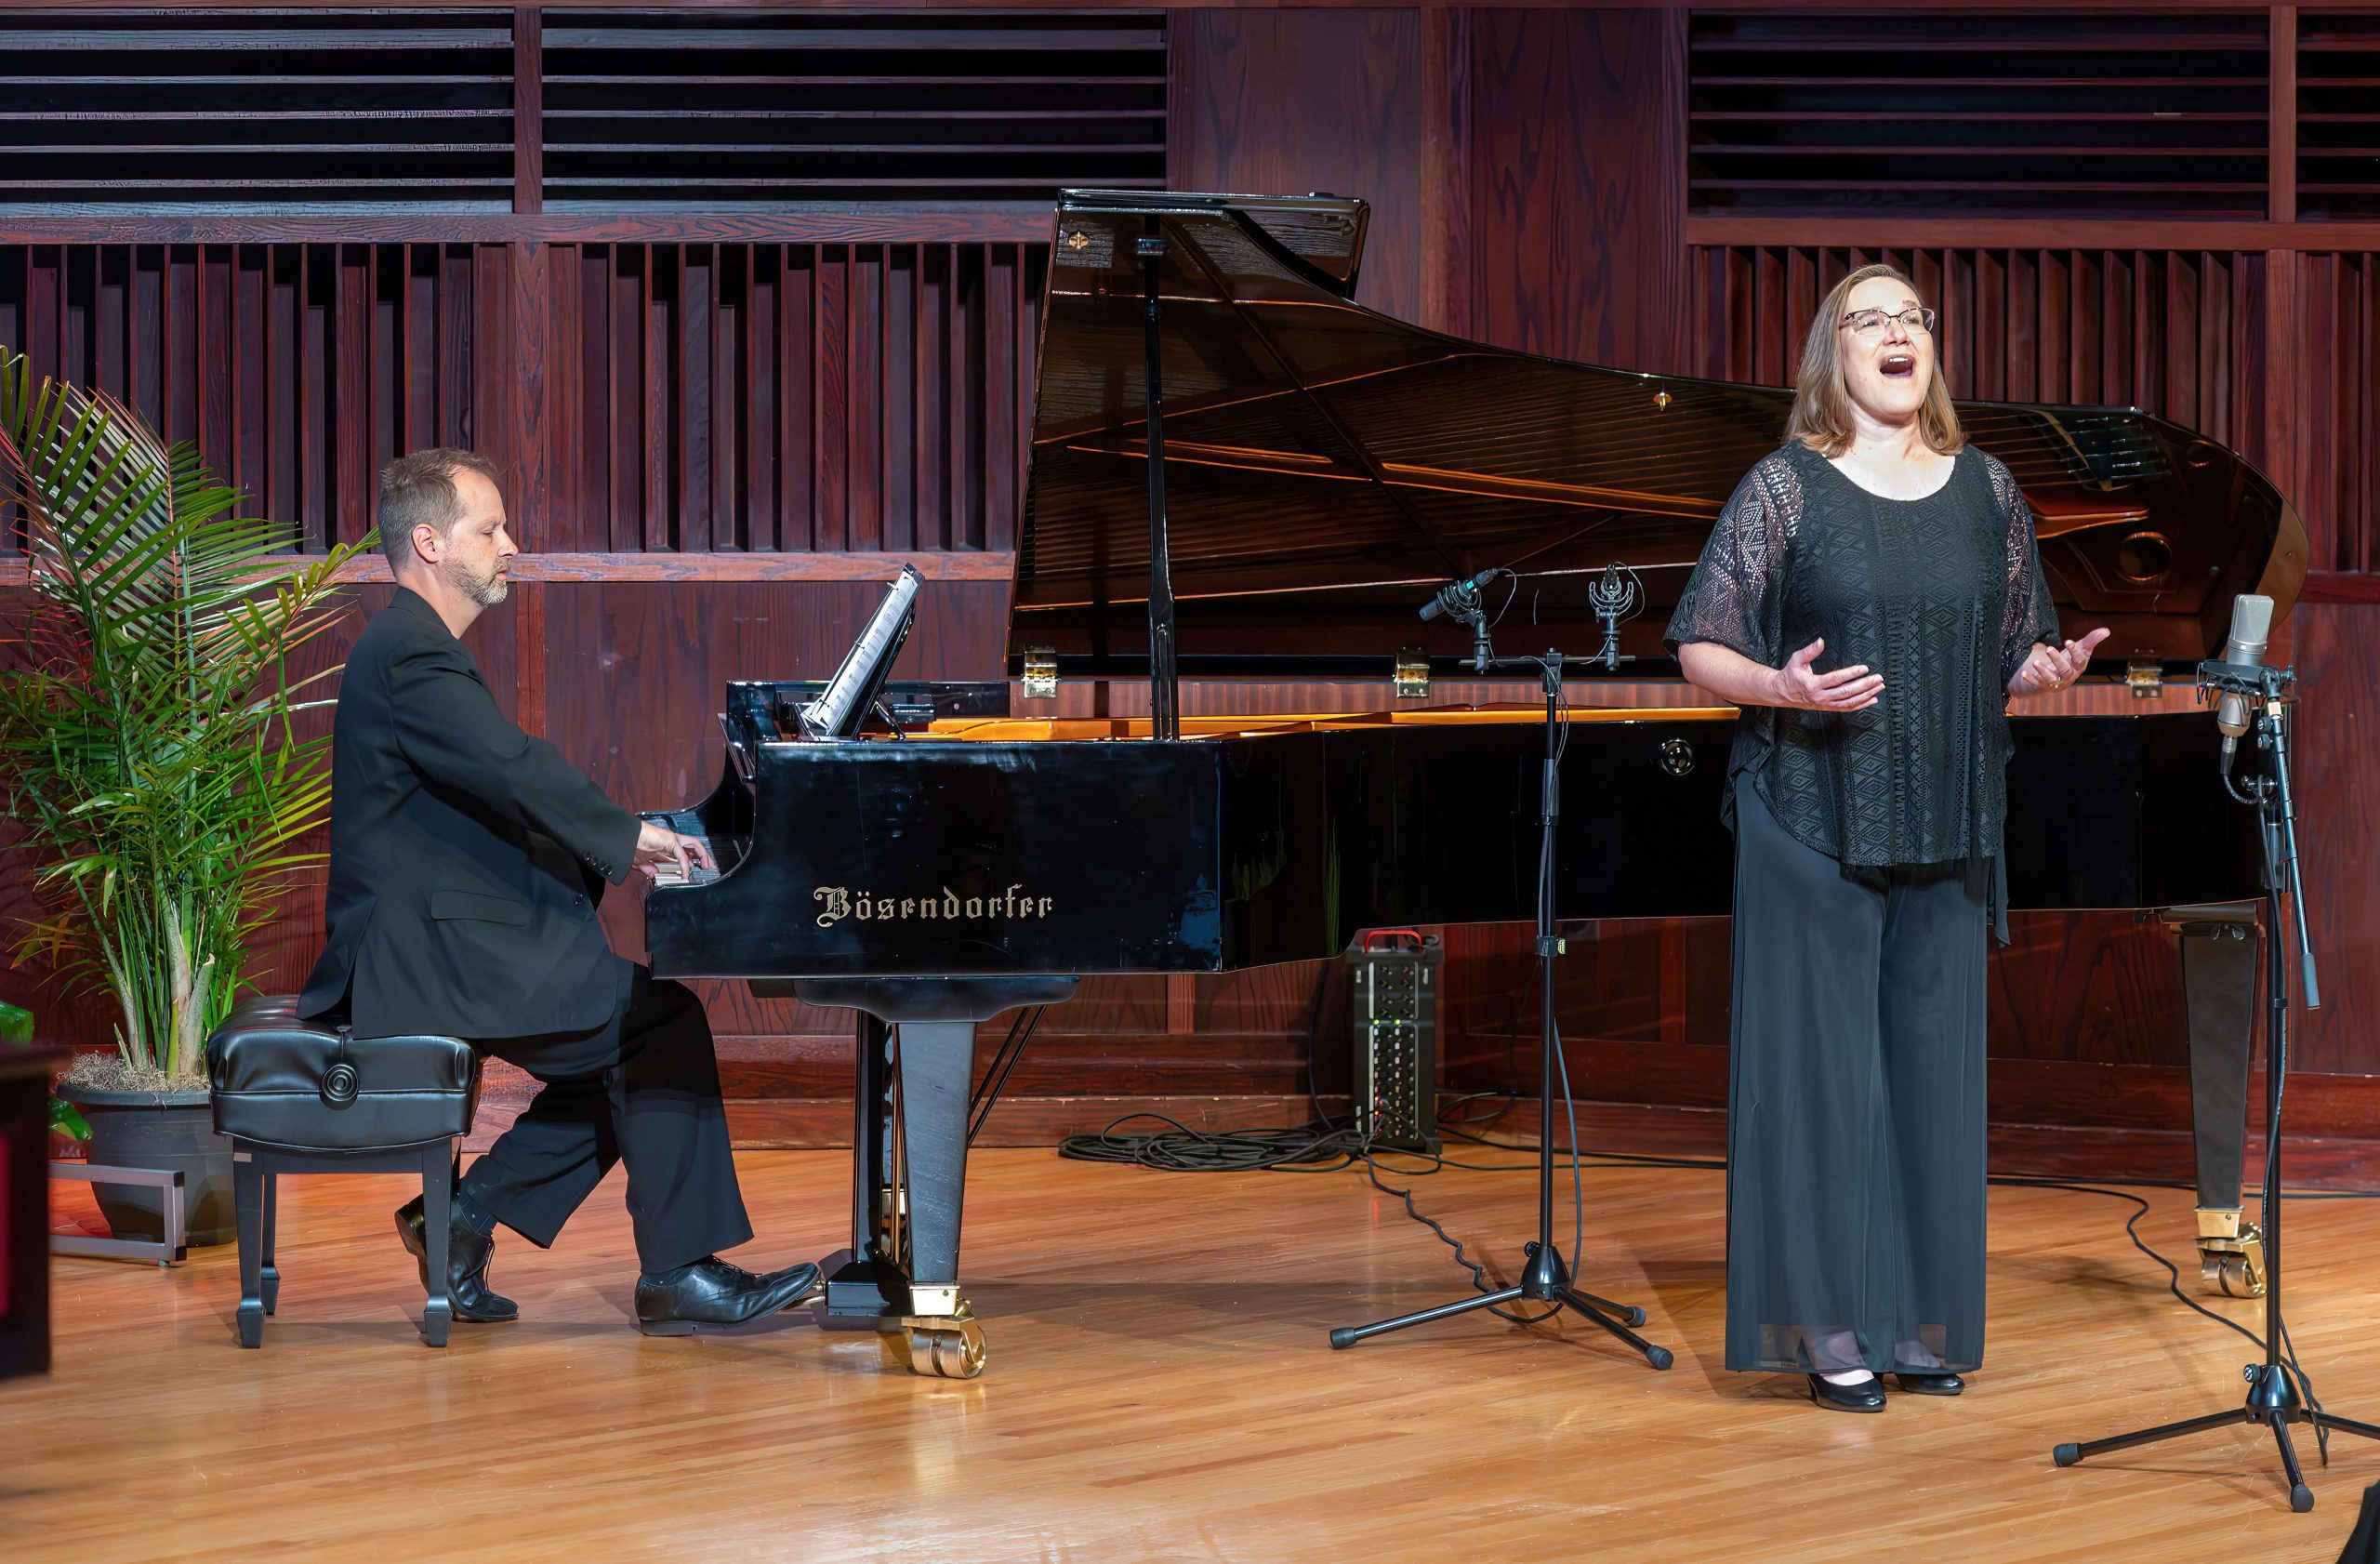 Mitzi Westra performs at 2023 UIndy Faculty Staff Institute, accompanied by pianist Gregory Martin